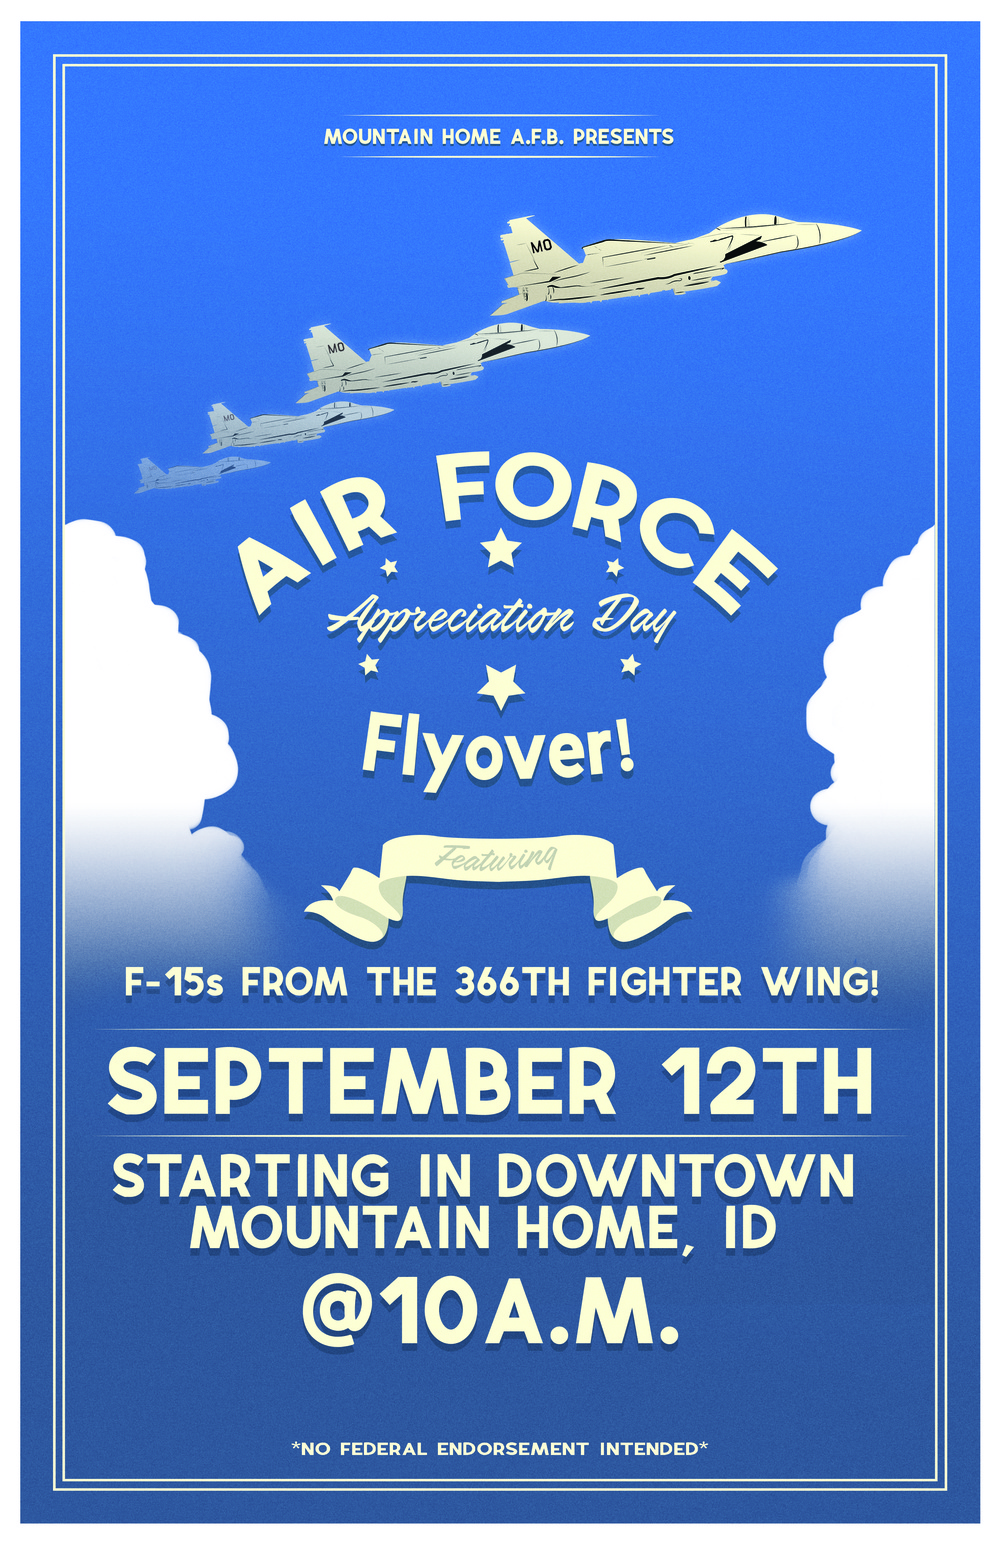 Mountain Home Air Force Base’s Air Force Appreciation Day flyover event